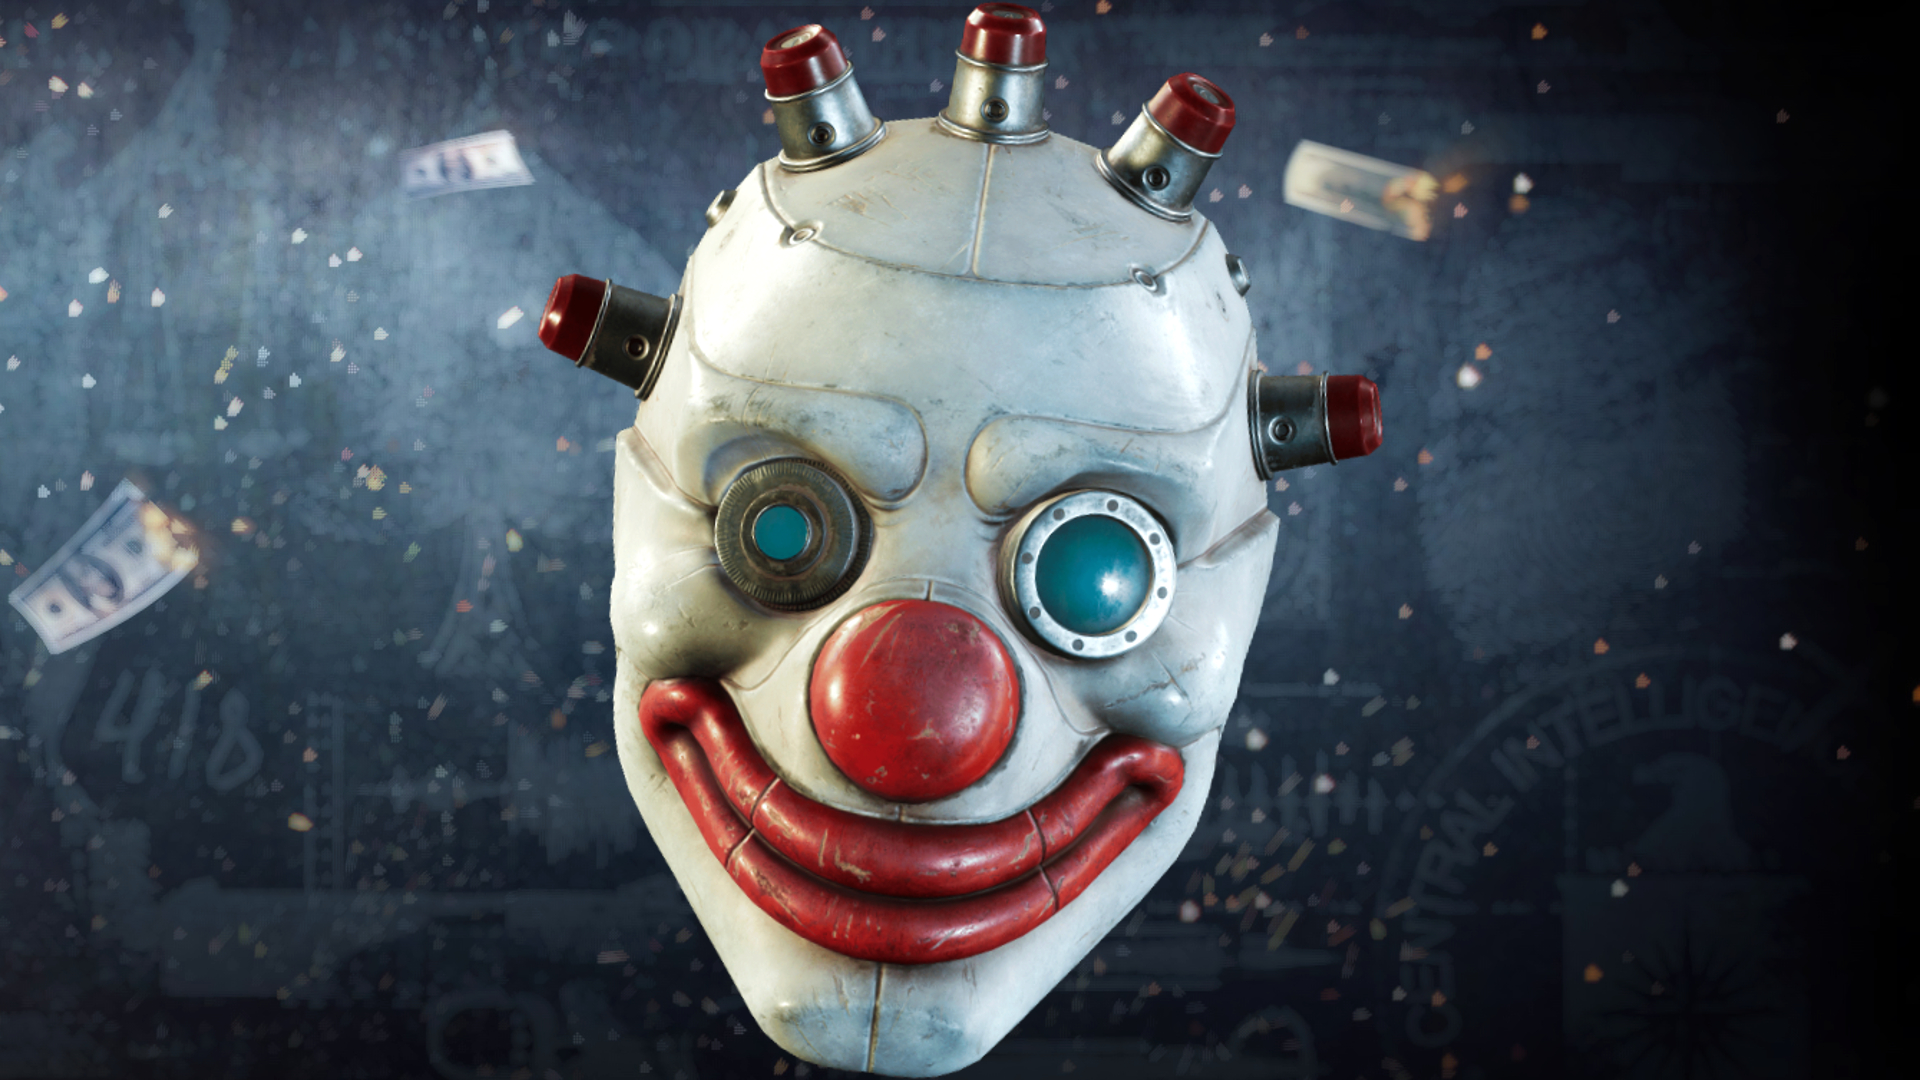 Payday 3 reveals early access stats, with 